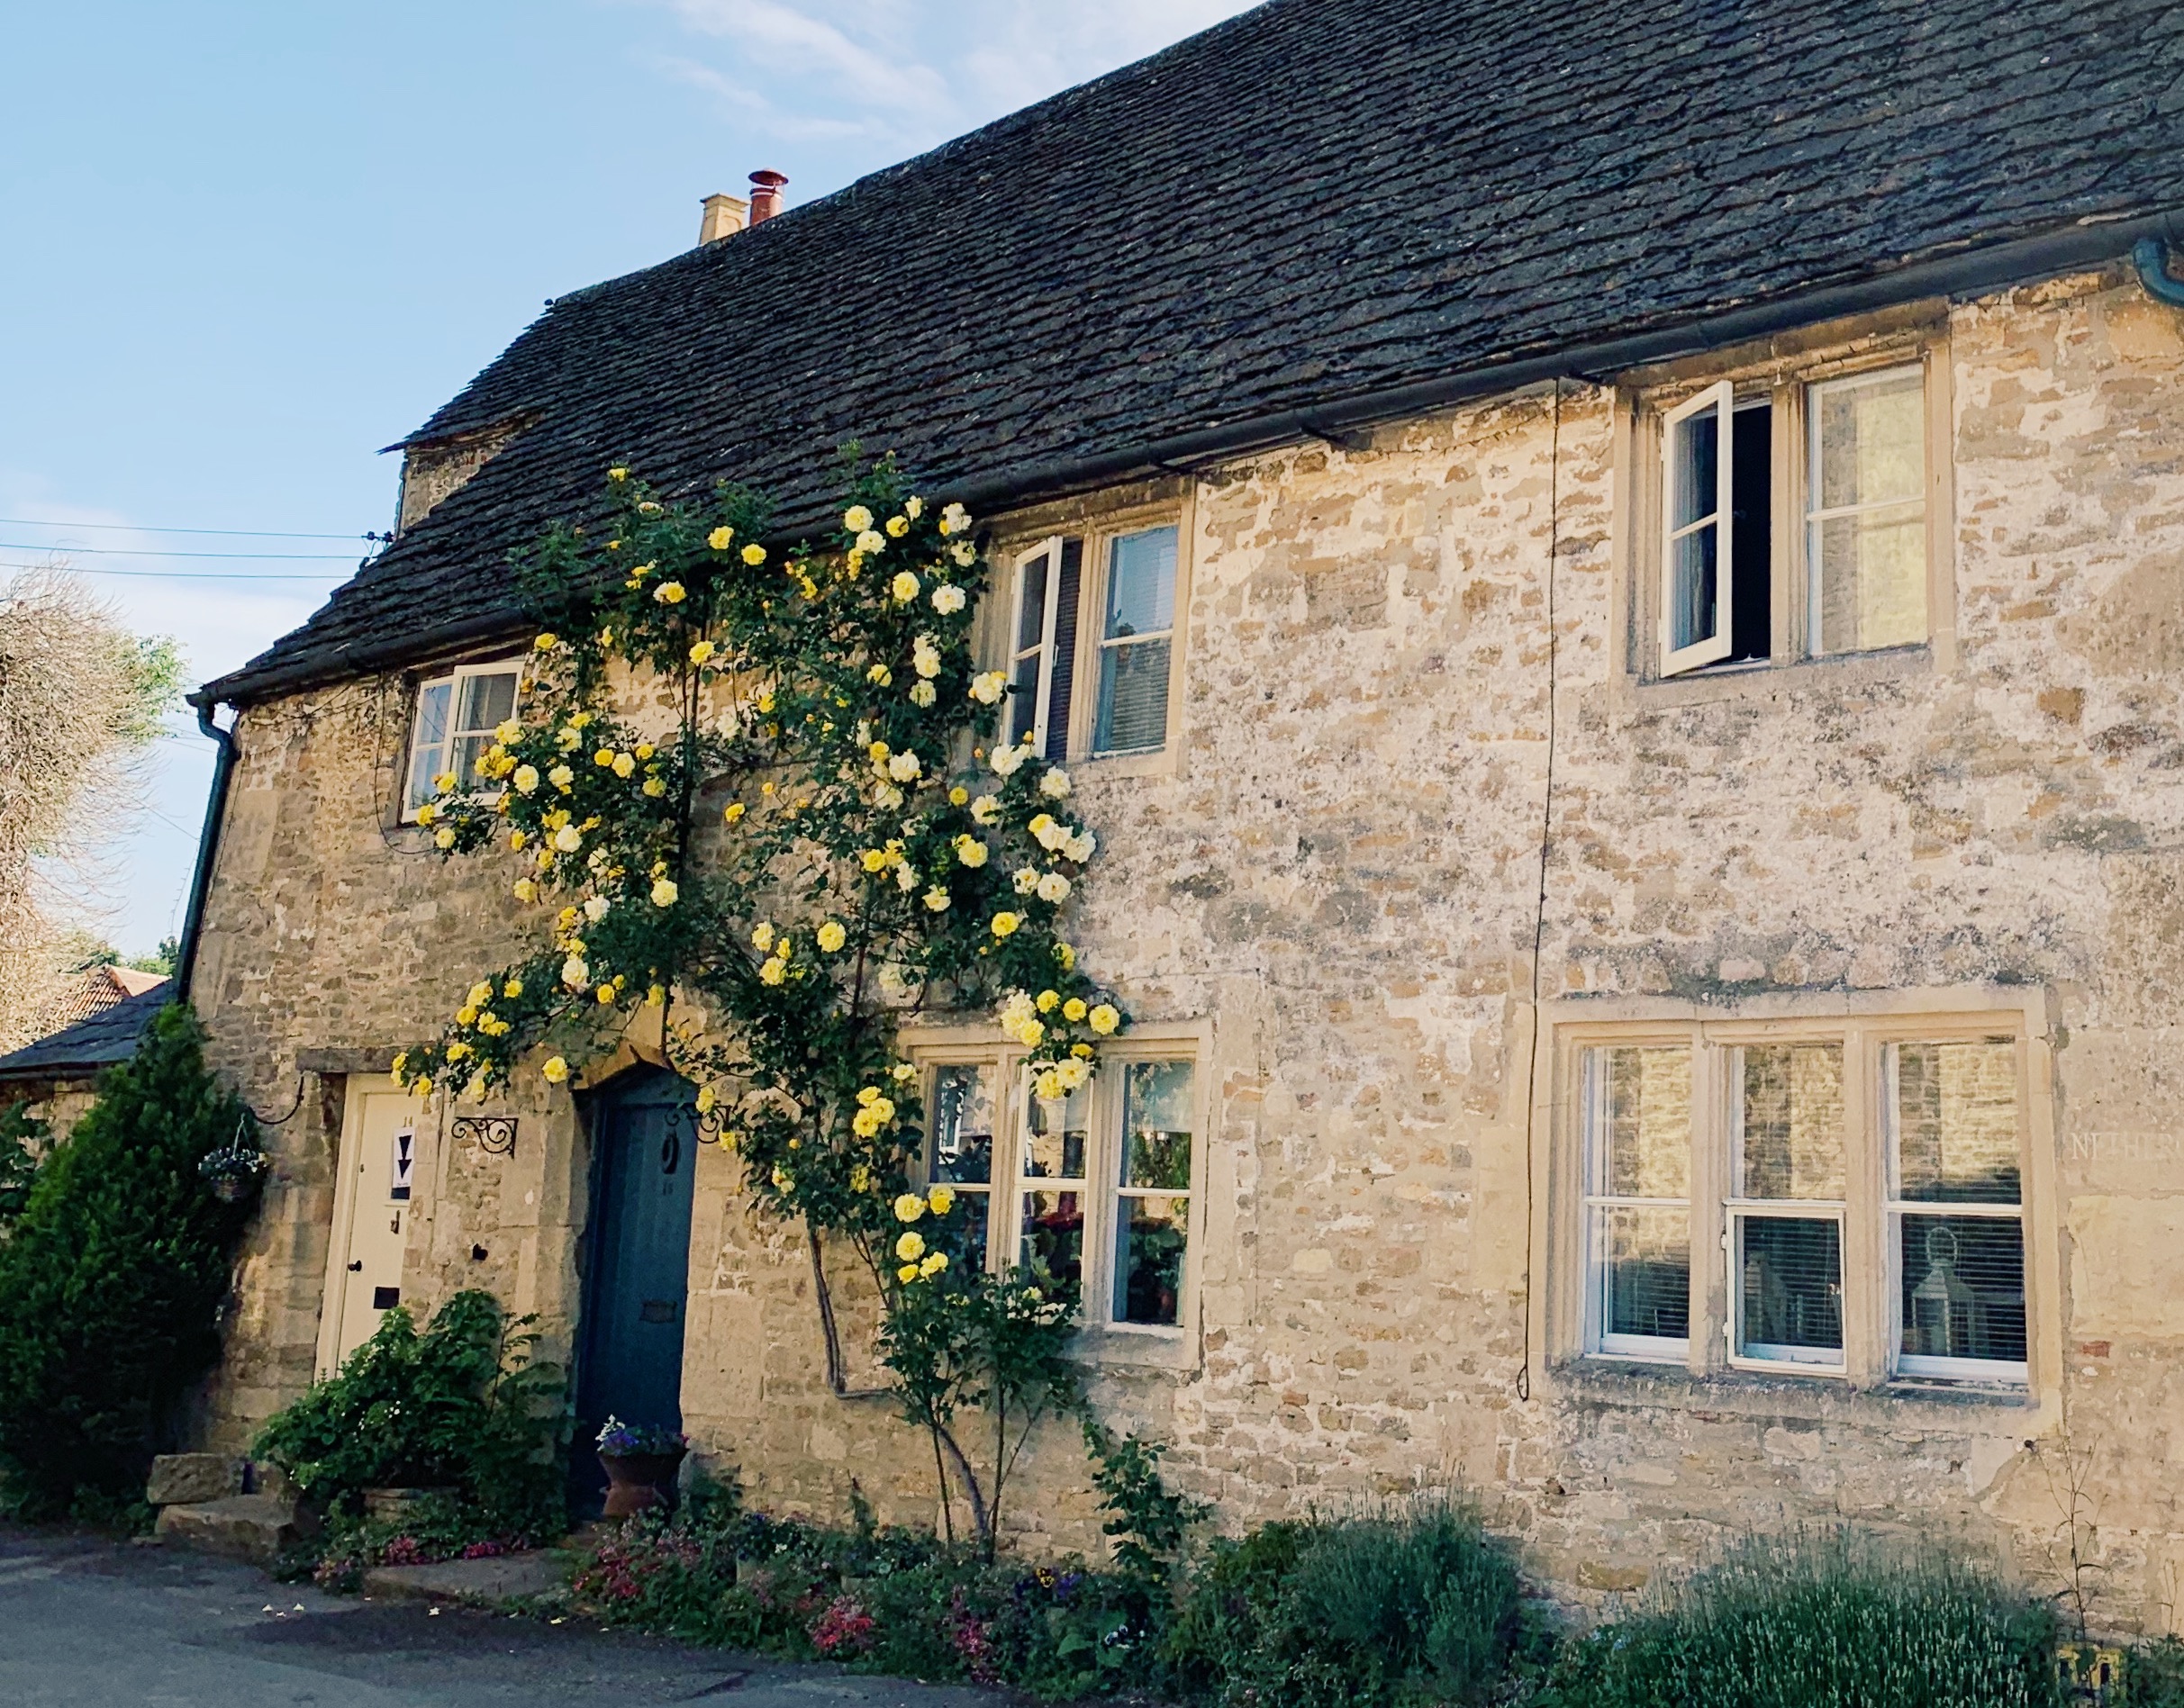 House in Lacock, England